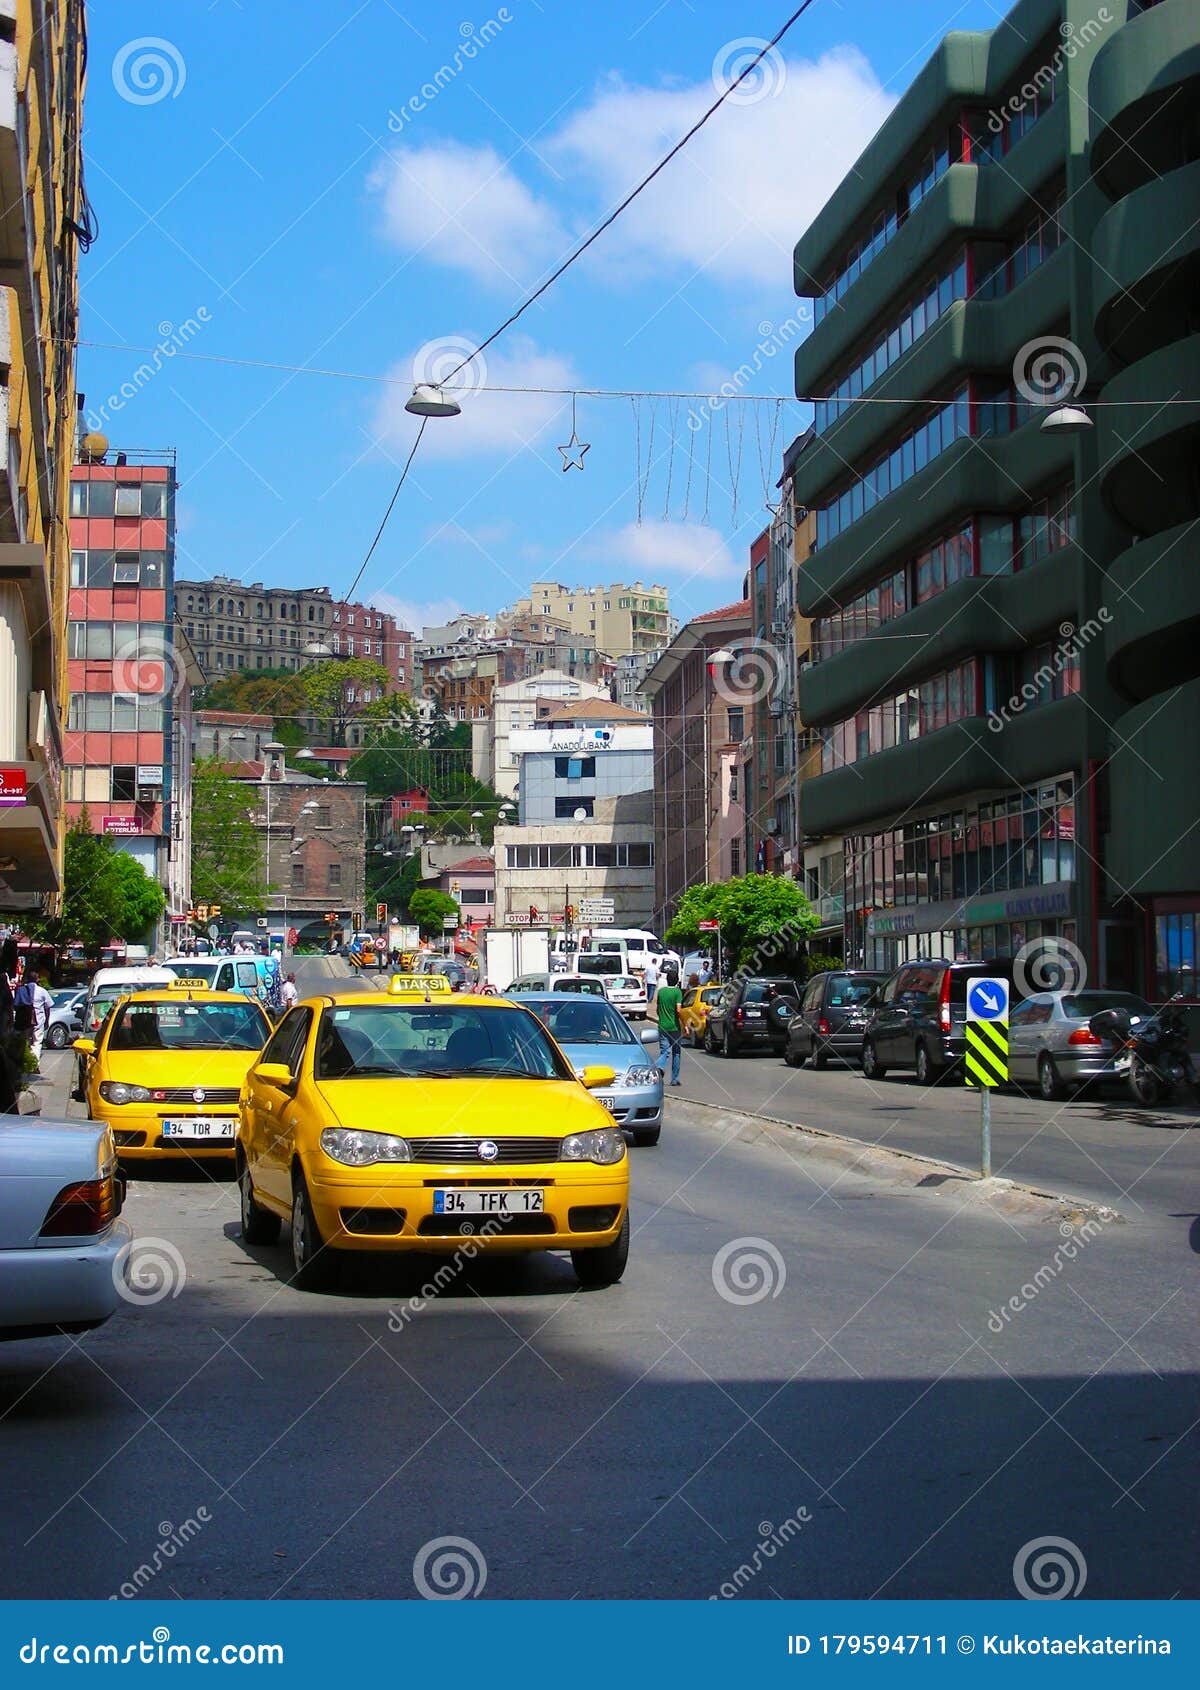 taxi driver istanbul turkey photos free royalty free stock photos from dreamstime